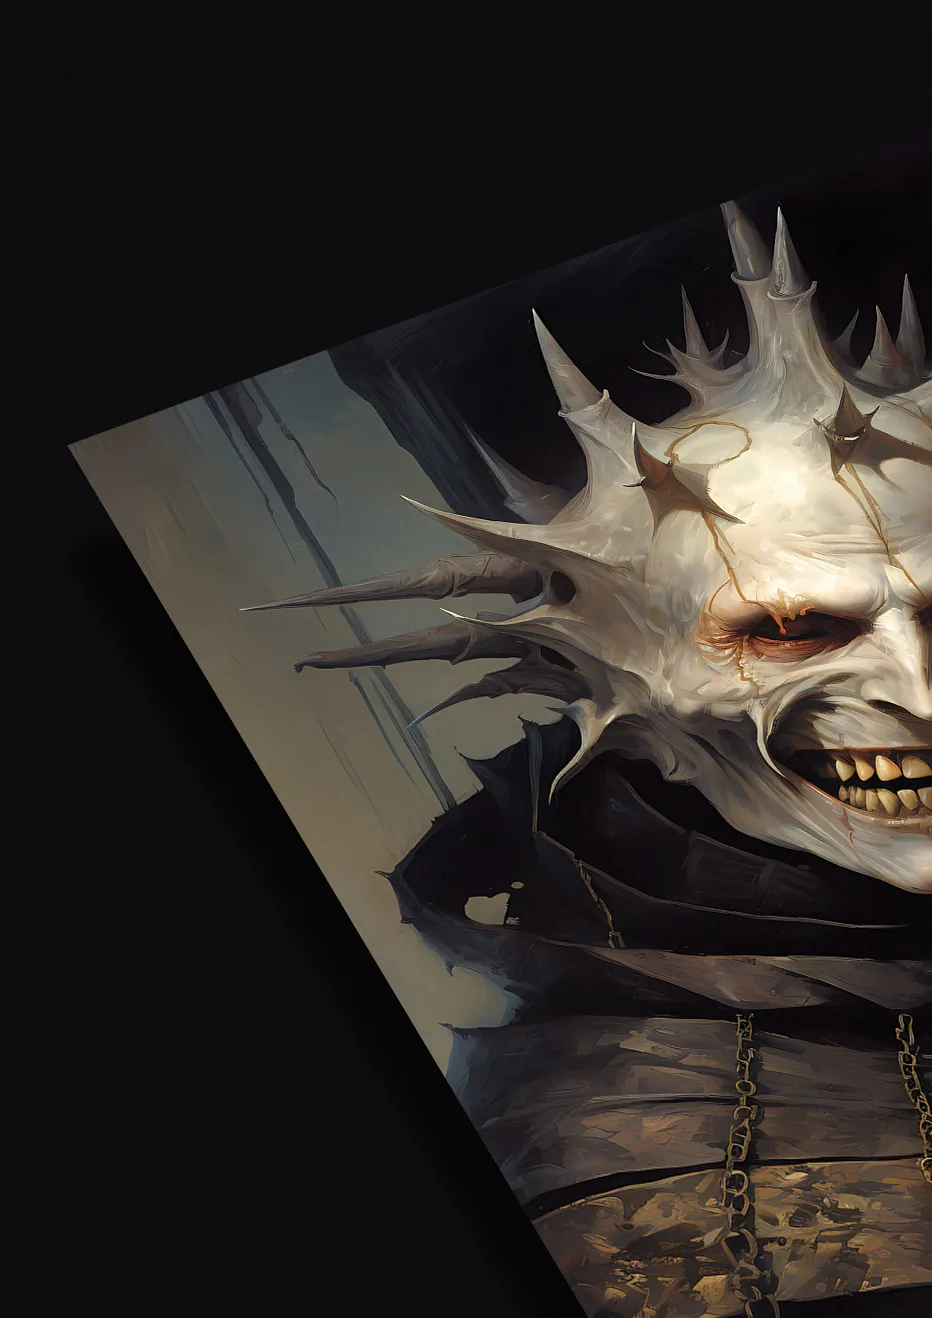 Artwork titled 'Jester of Madness' featuring an unsettling figure with a sinister grin against a dark background.